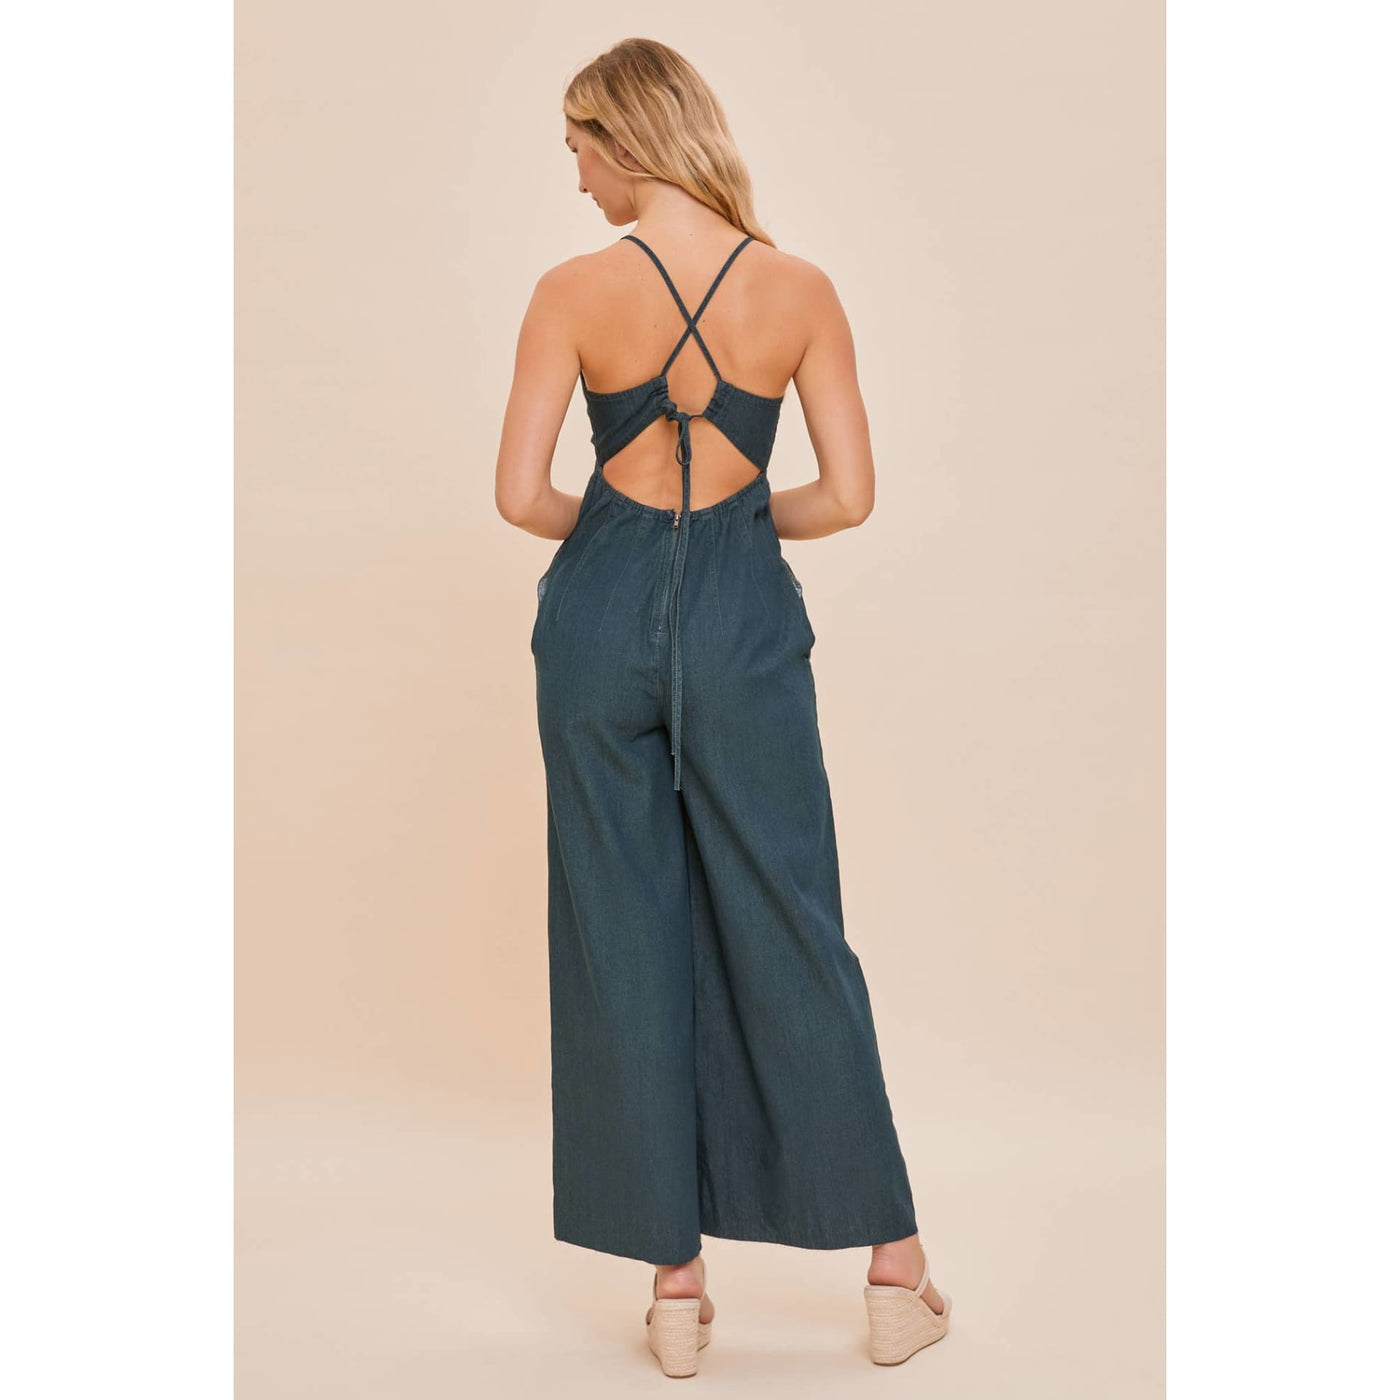 Into The Night Jumpsuit - 170 Casual Dresses/Jumpsuits/Rompers